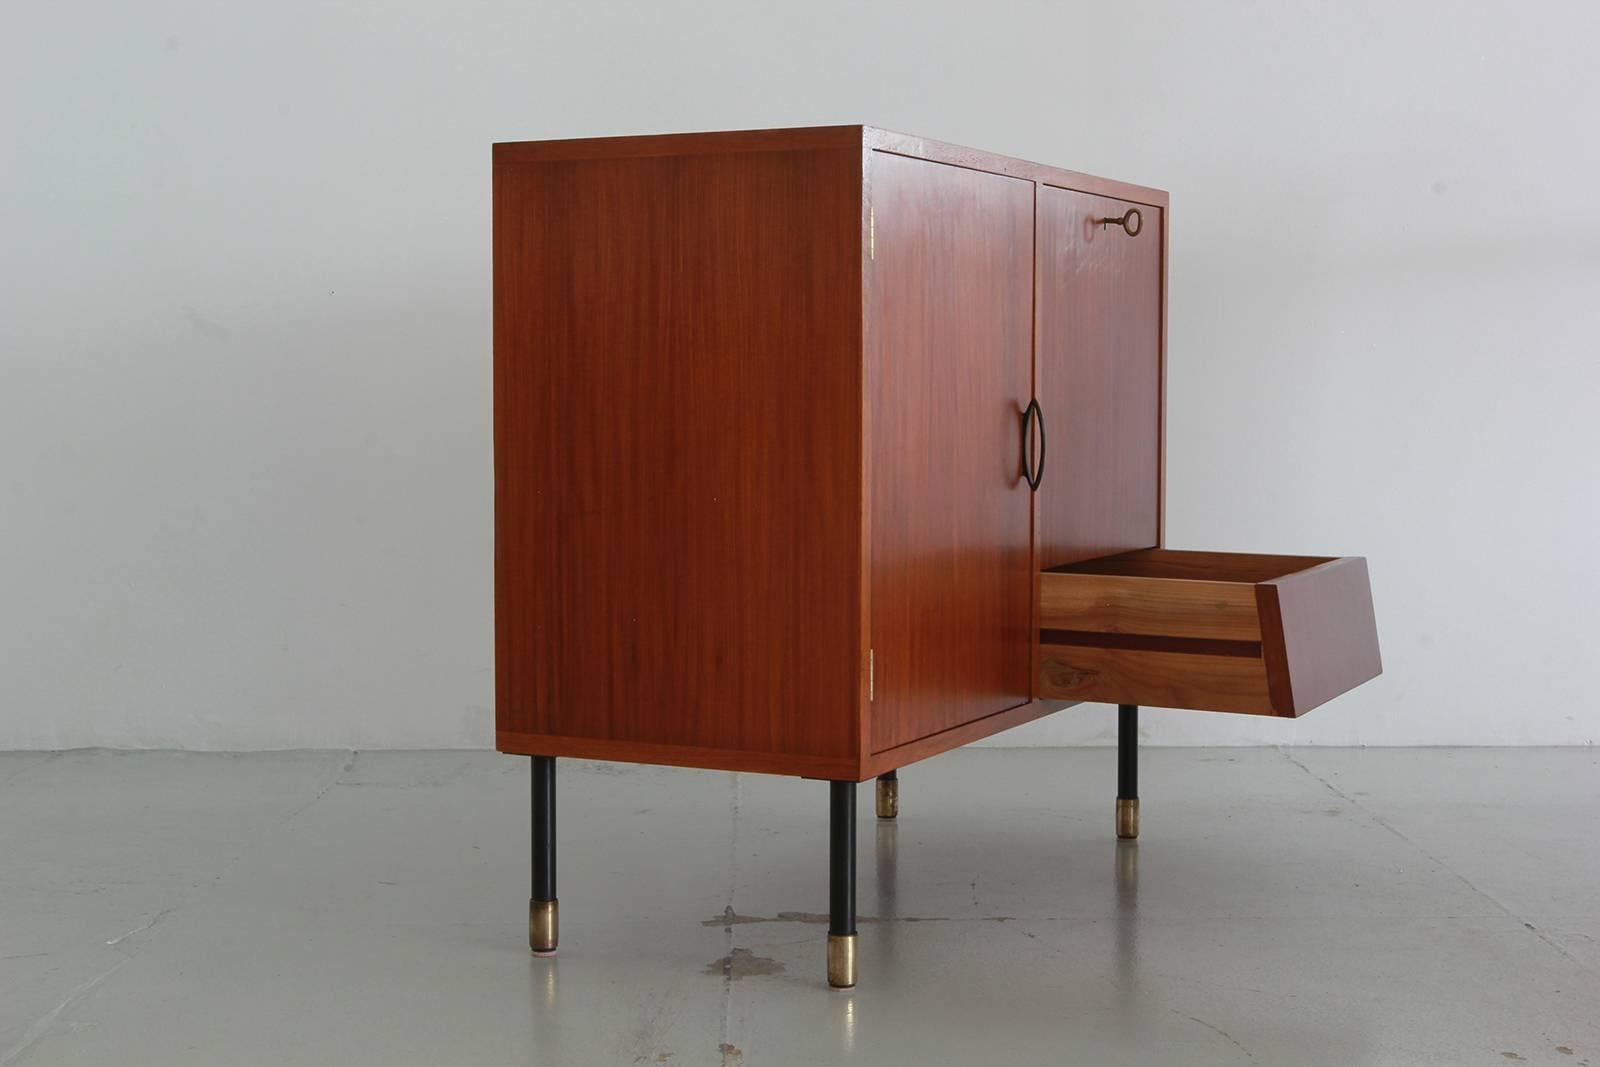 Handsome Italian cabinet by I.S.A Bergamo with open cabinet shelving, drop down door with open shelving, and a single drawer. Brass hardware on iron legs and brass feet.
Total of three similar cabinets available.